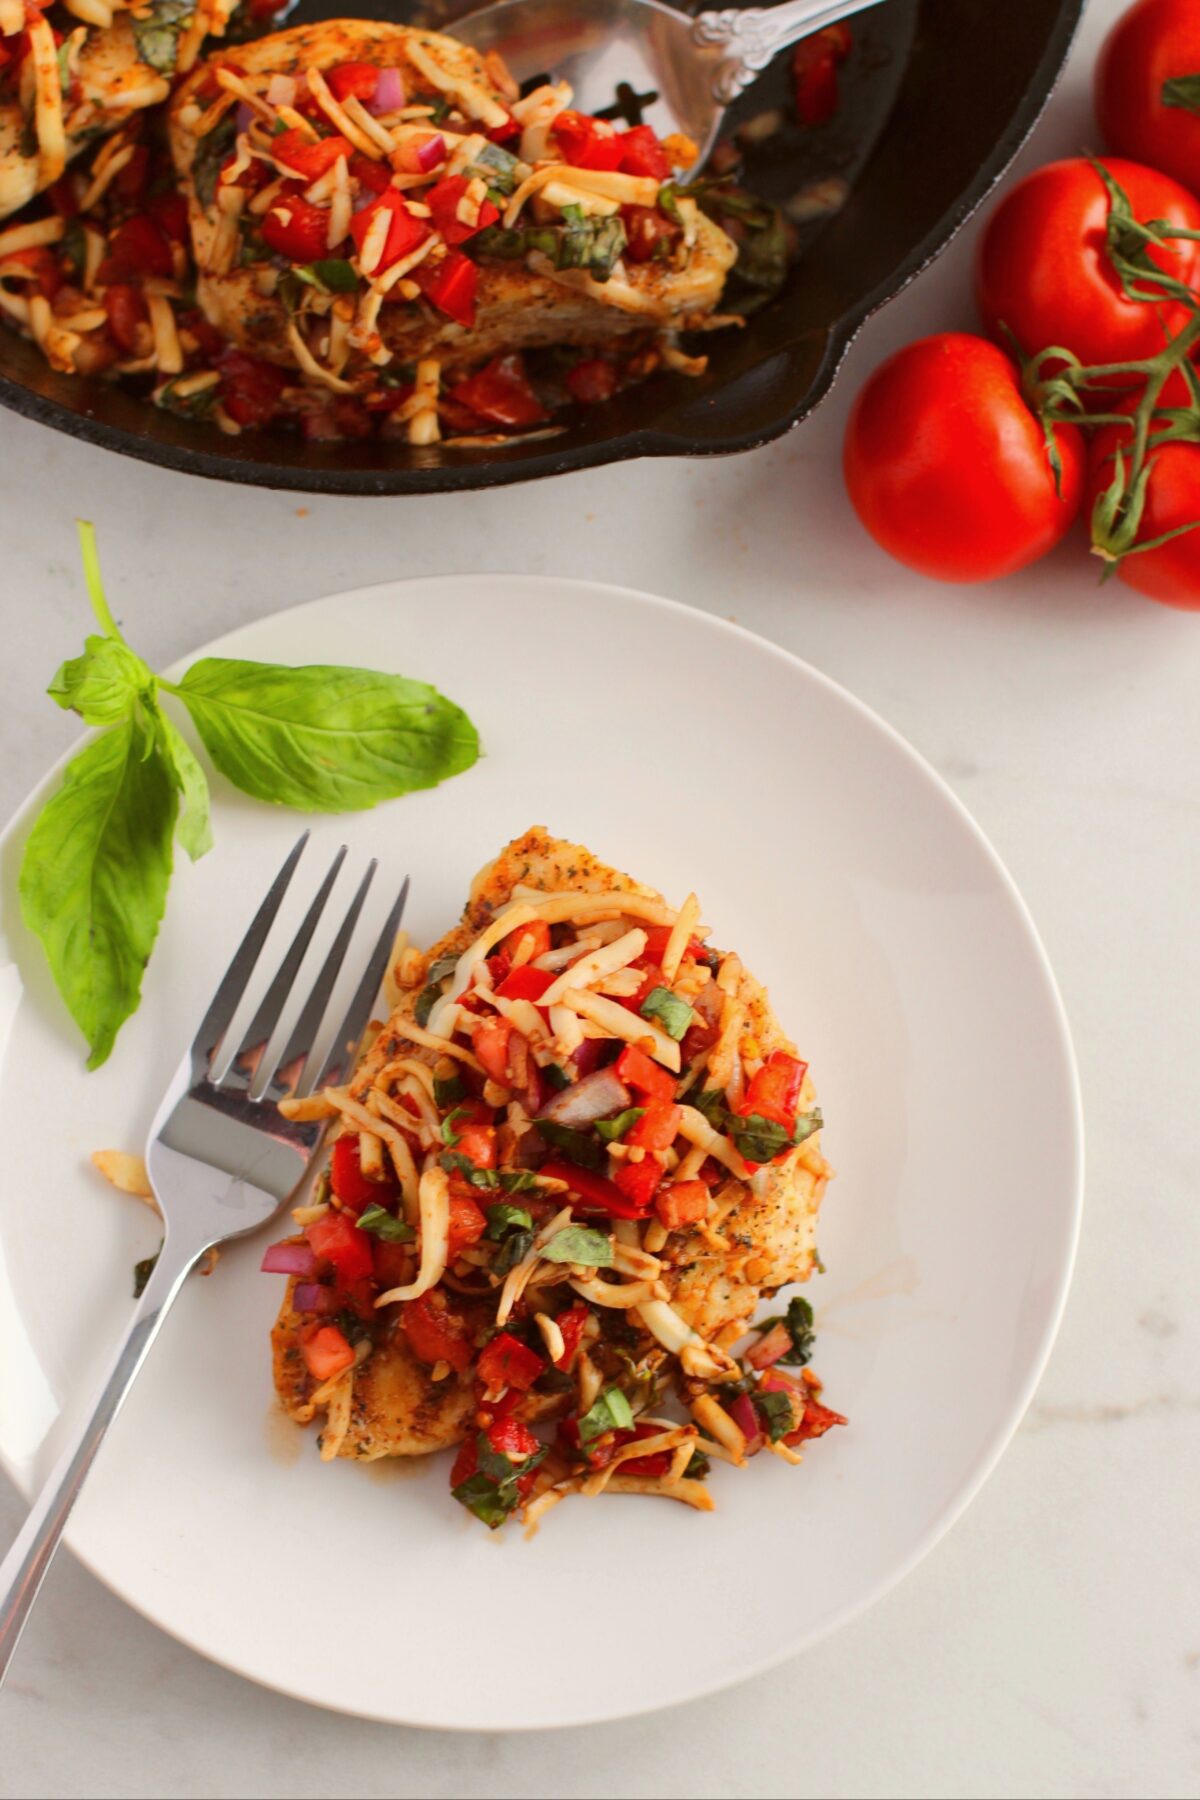 Looking for a delicious and easy low carb meal? This skillet bruschetta chicken recipe is perfect for a quick and tasty weeknight meal.